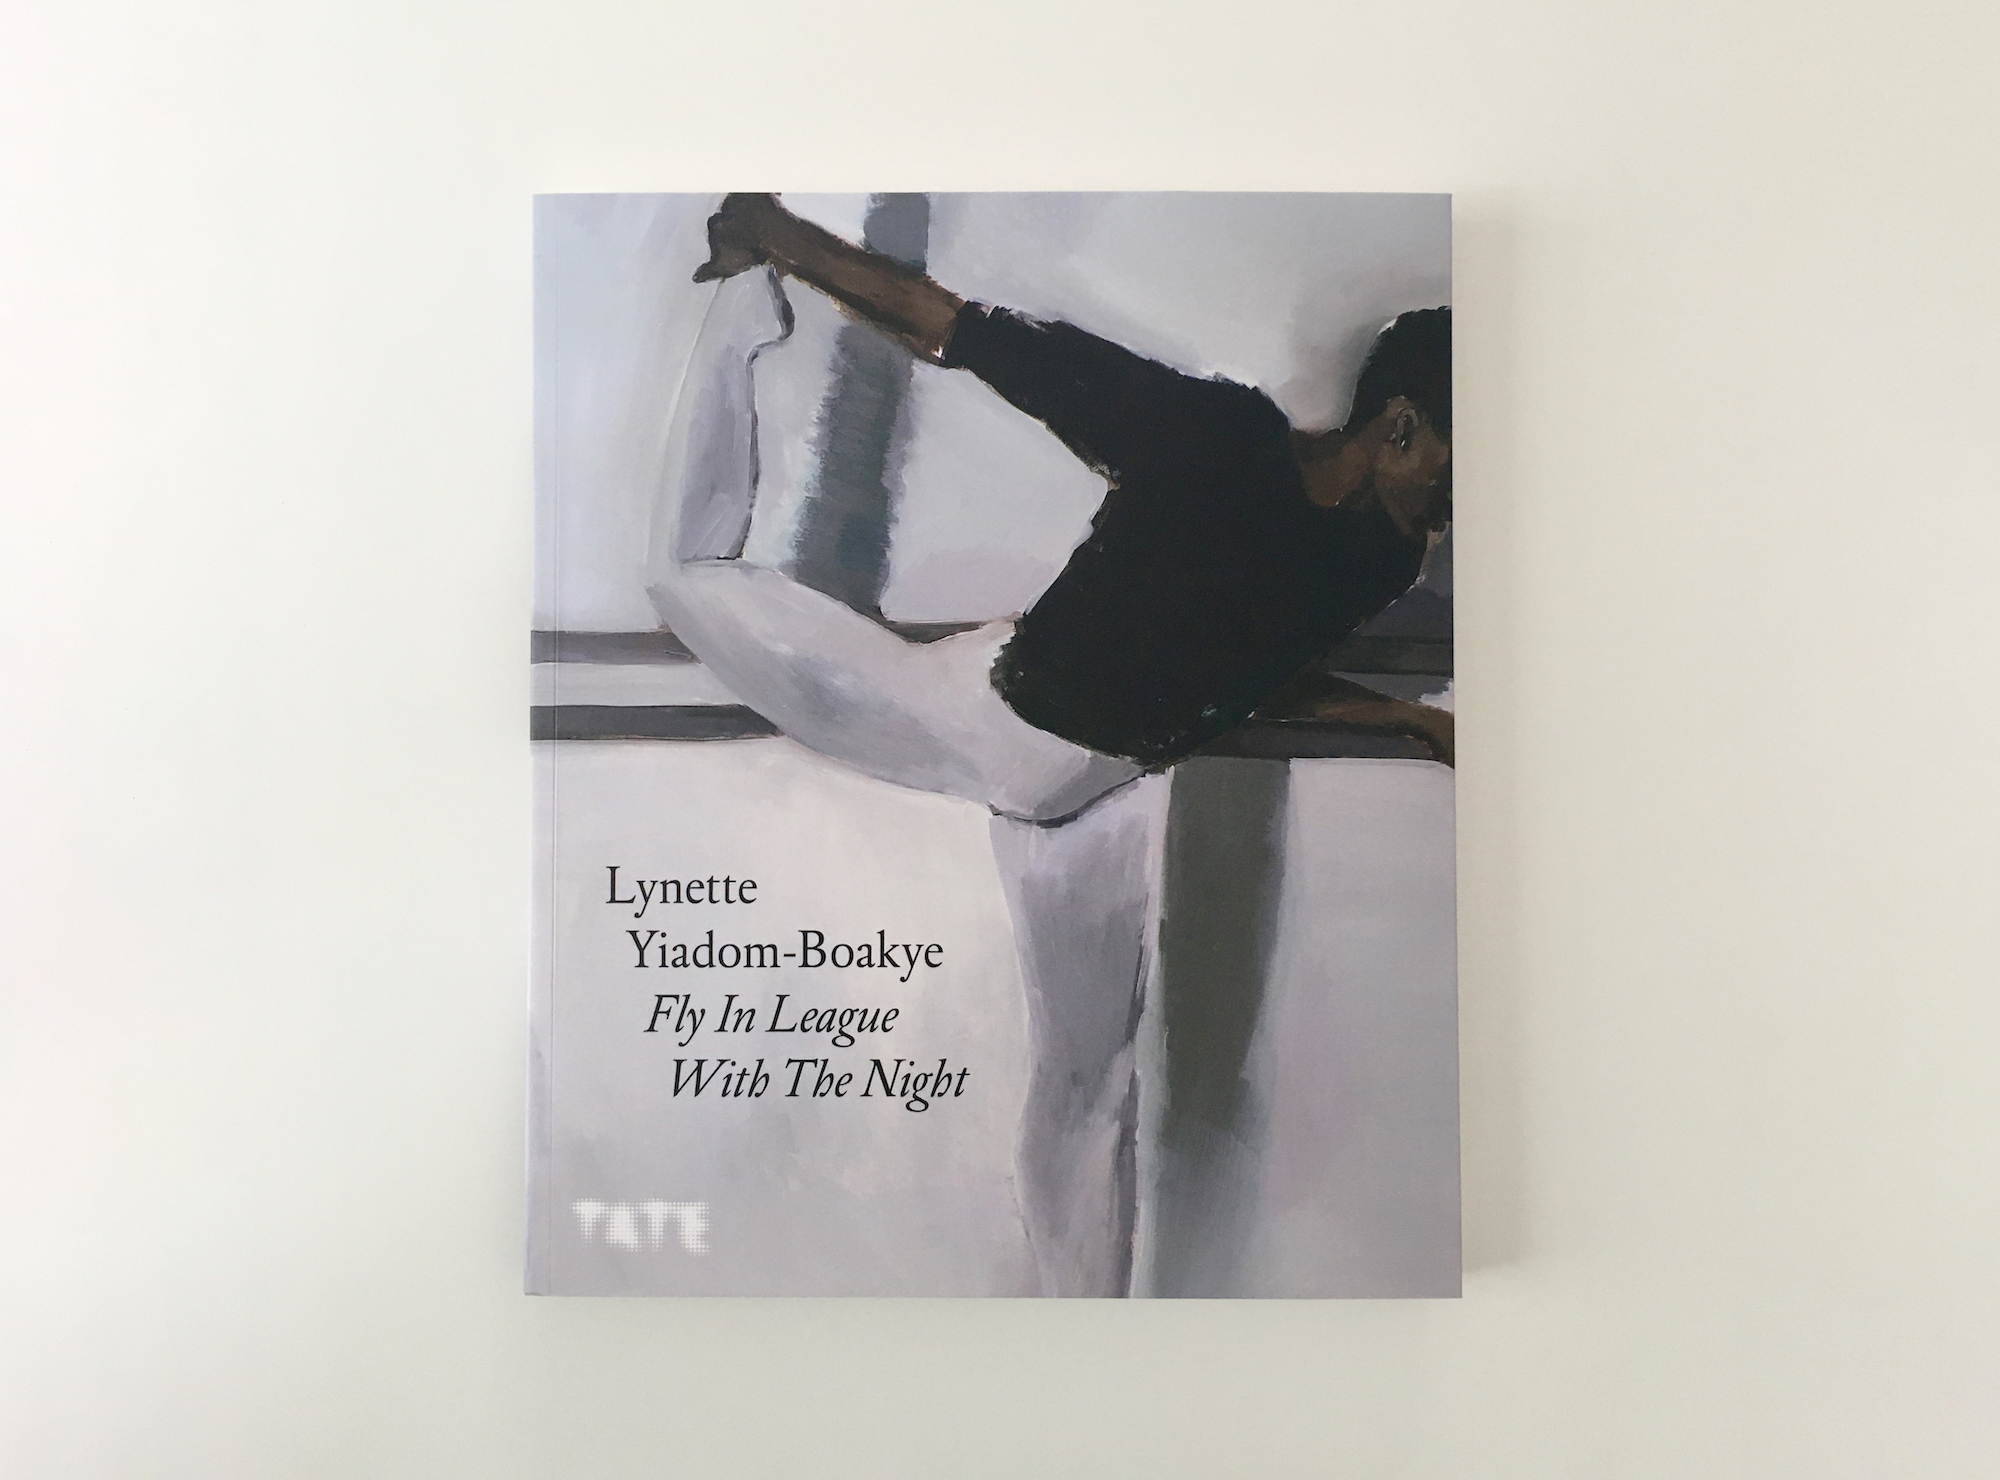 Lynette Yiadom-Boakye: Fly In League With The Night published by Tate, 2020